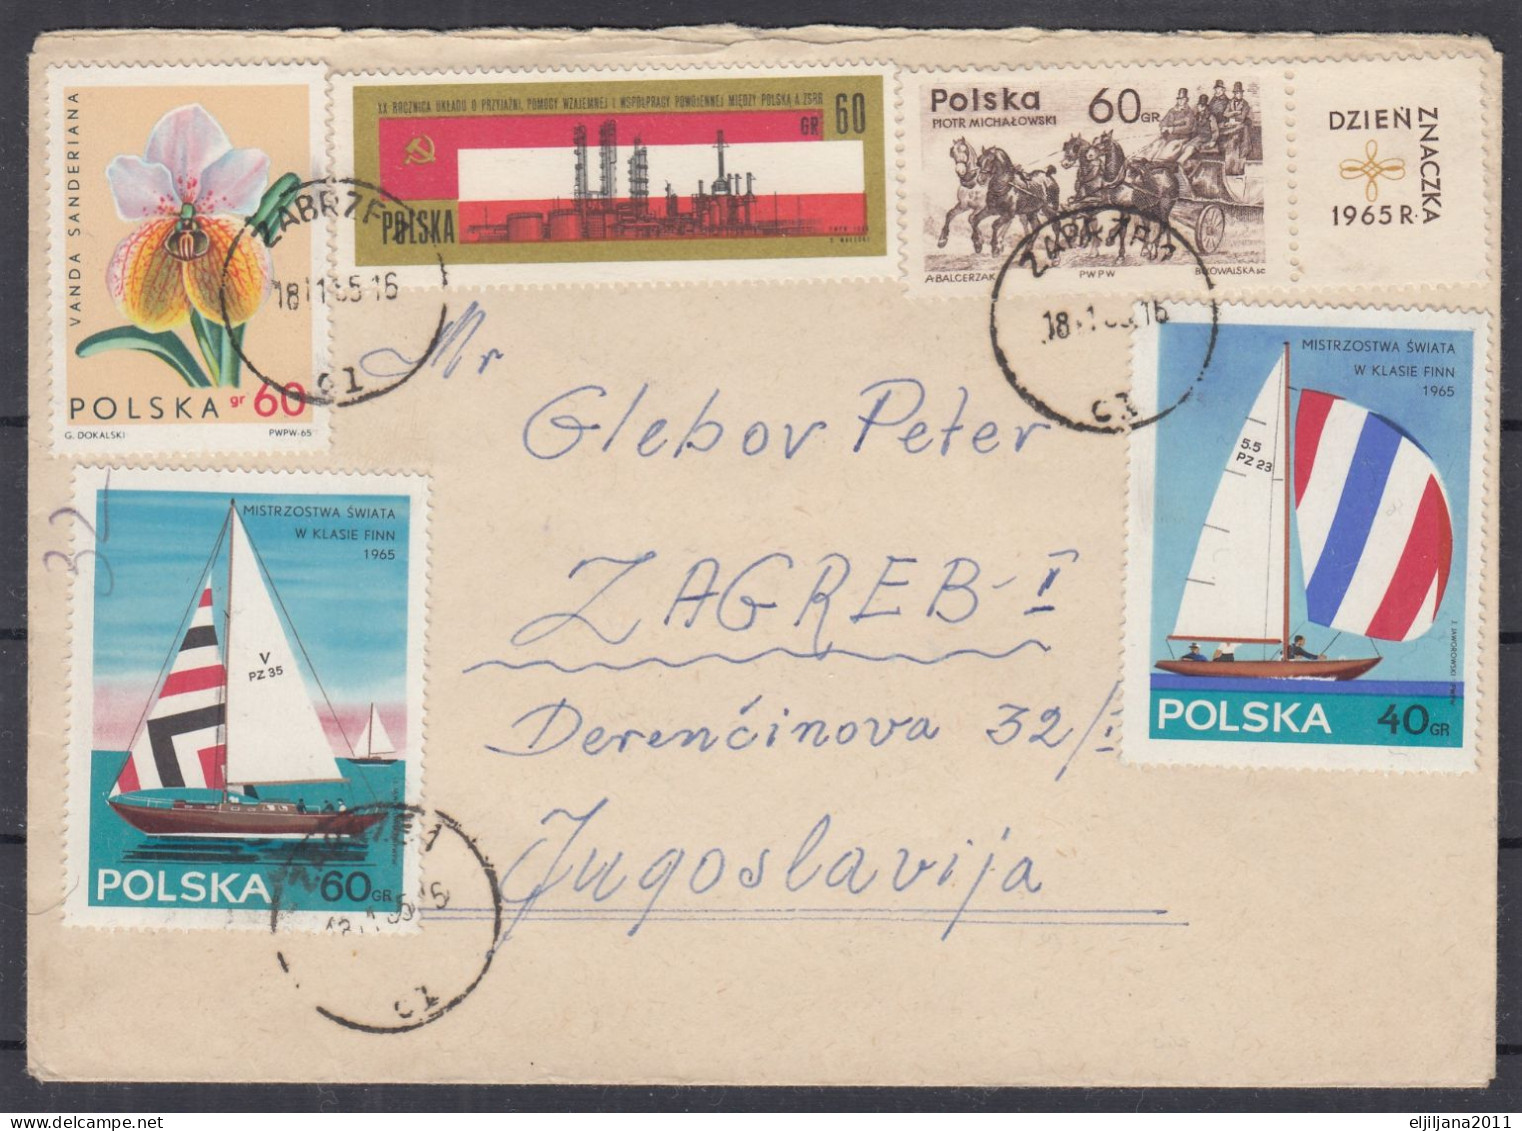 ⁕ Poland 1965 ⁕ ZABRZE - ZAGREB ⁕ Nice Cover With Stamps - Covers & Documents